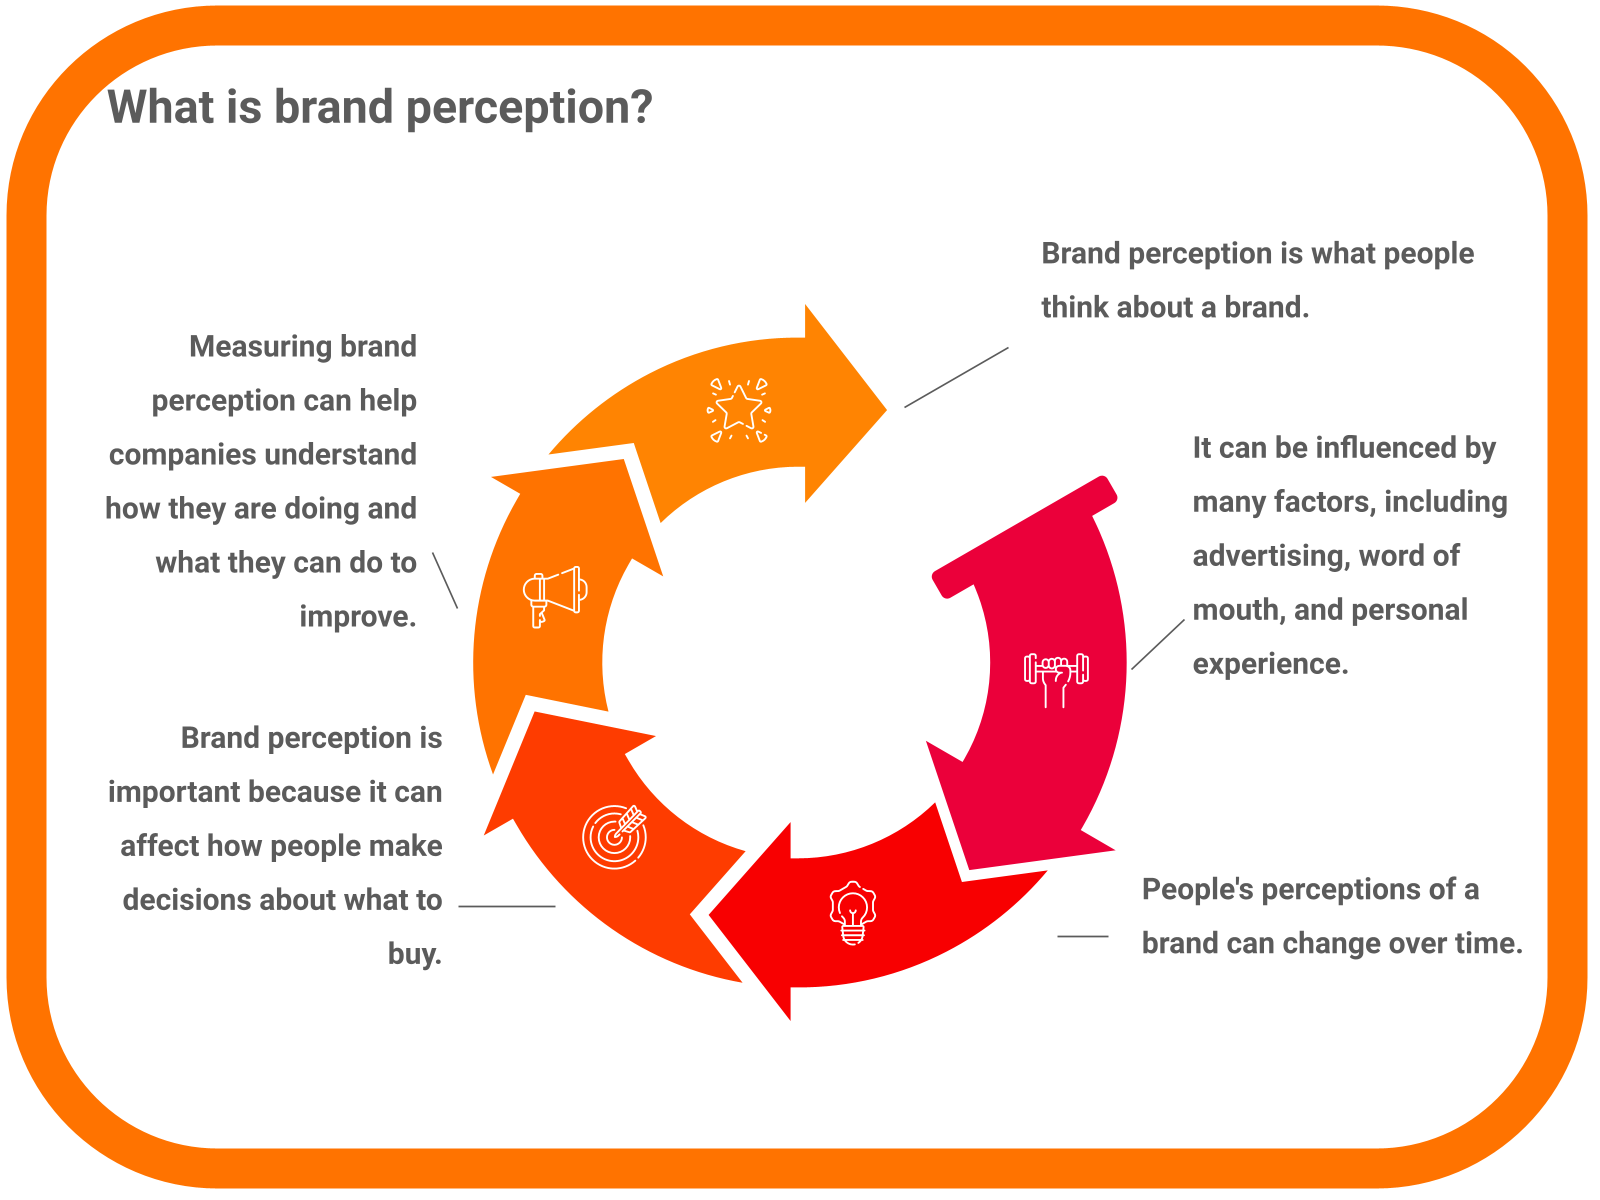 What is brand perception?